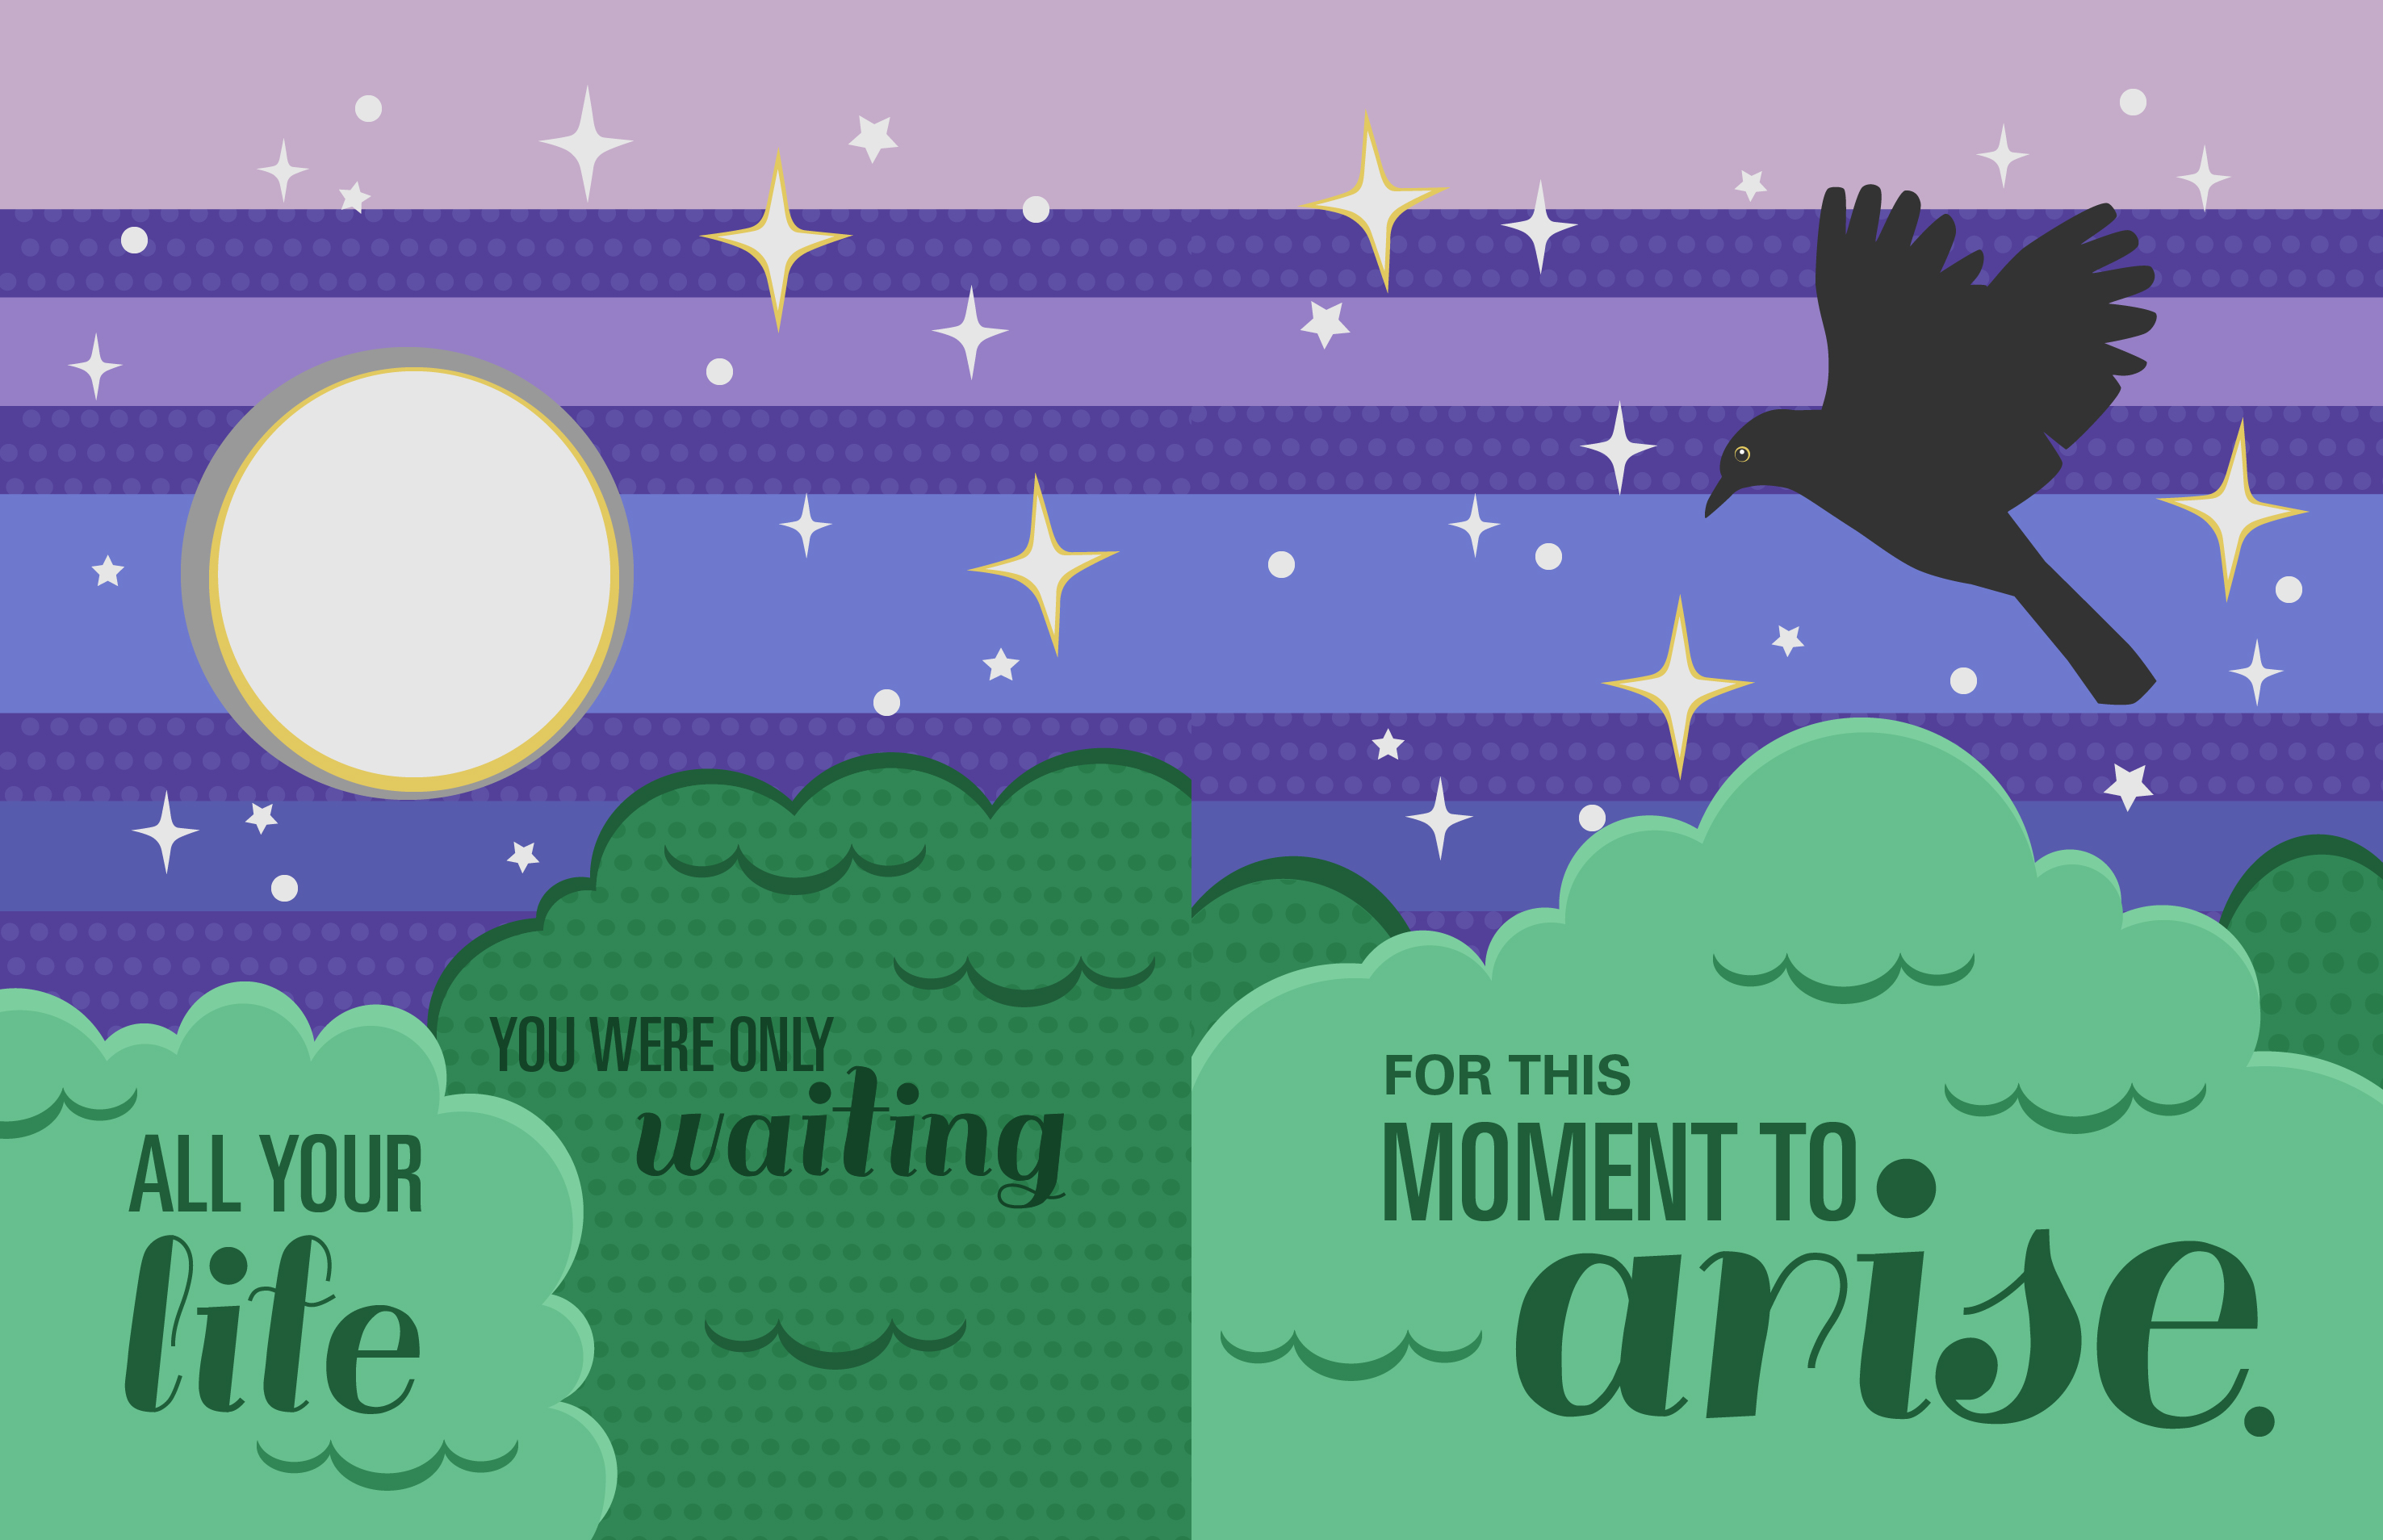 two vector designs of a night sky and forest with text 'all your life you were only waiting for this moment to arise' split between the posters. the left one has a big full moon and the right has a drawing of a blackbird. the sky has a gradient of purple stripes and white and yellow stars.